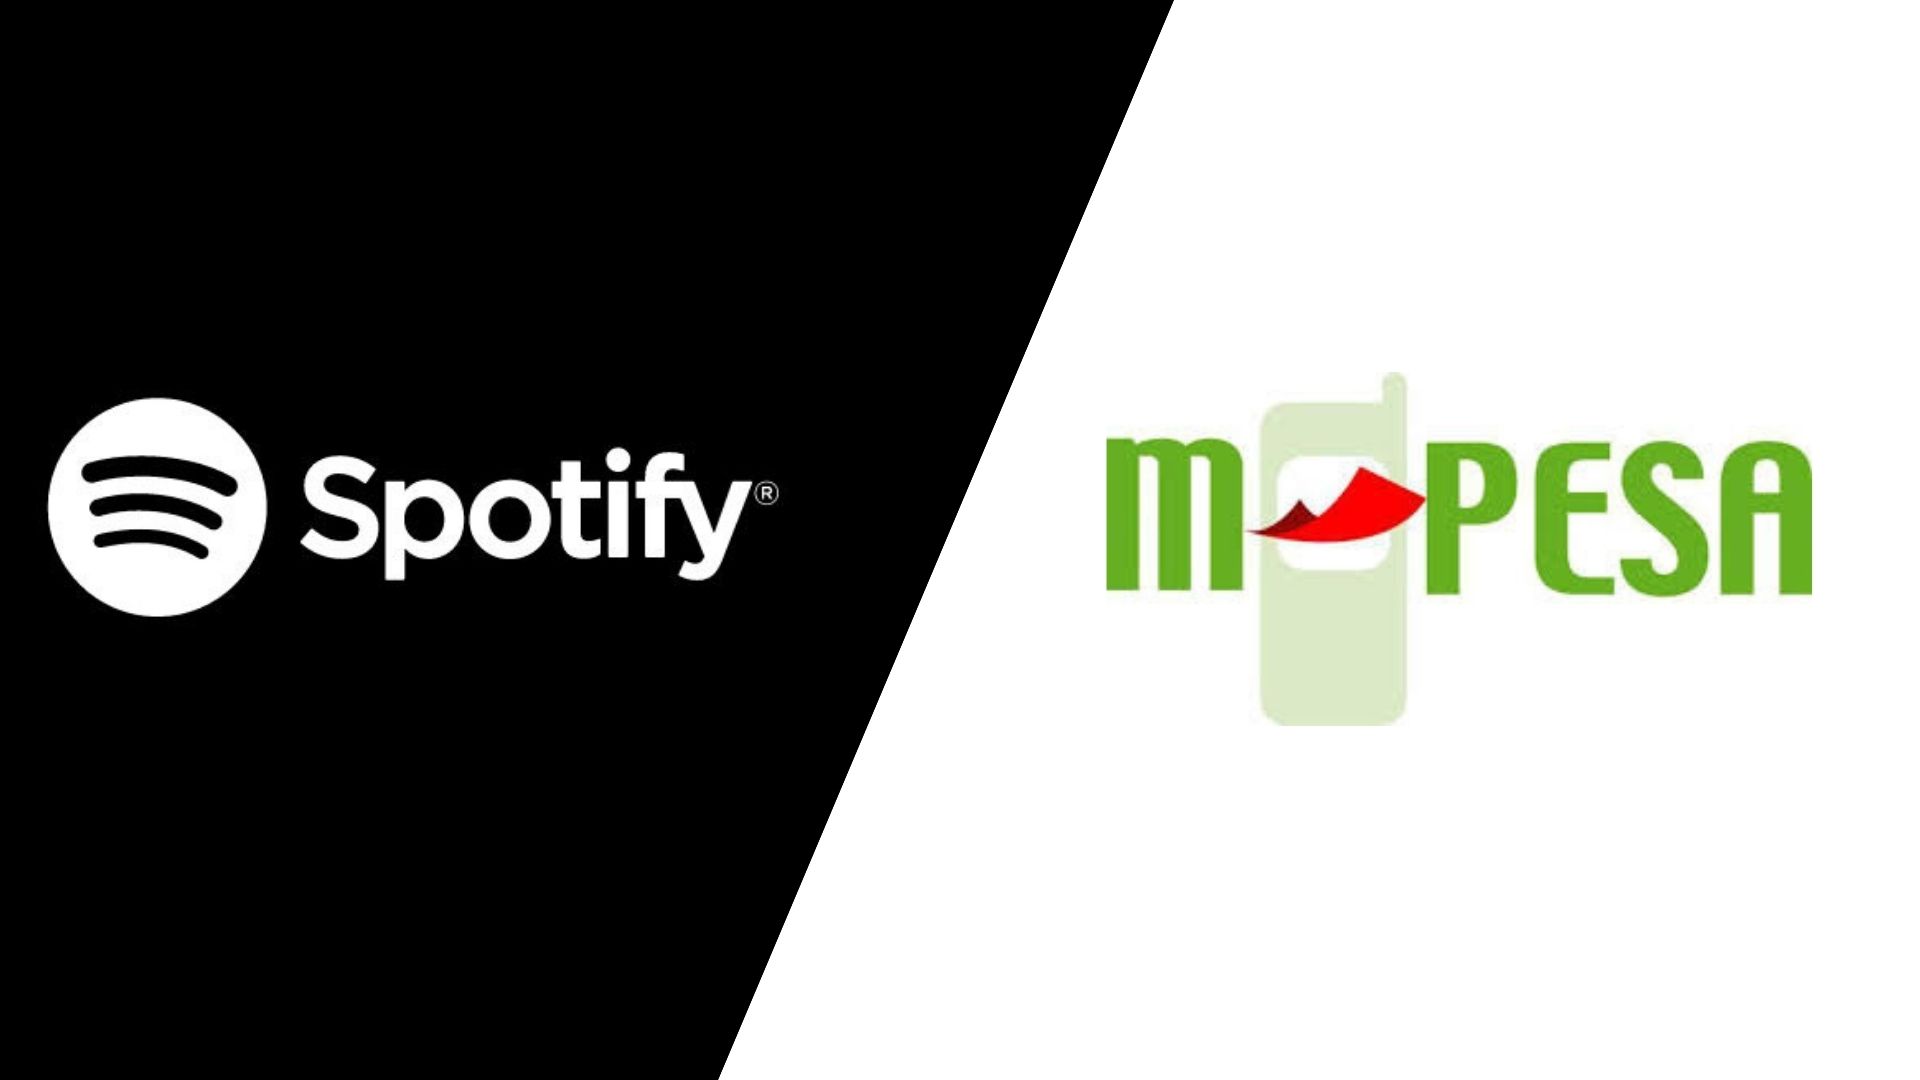 Spotify Payment with Mpesa in Kenya